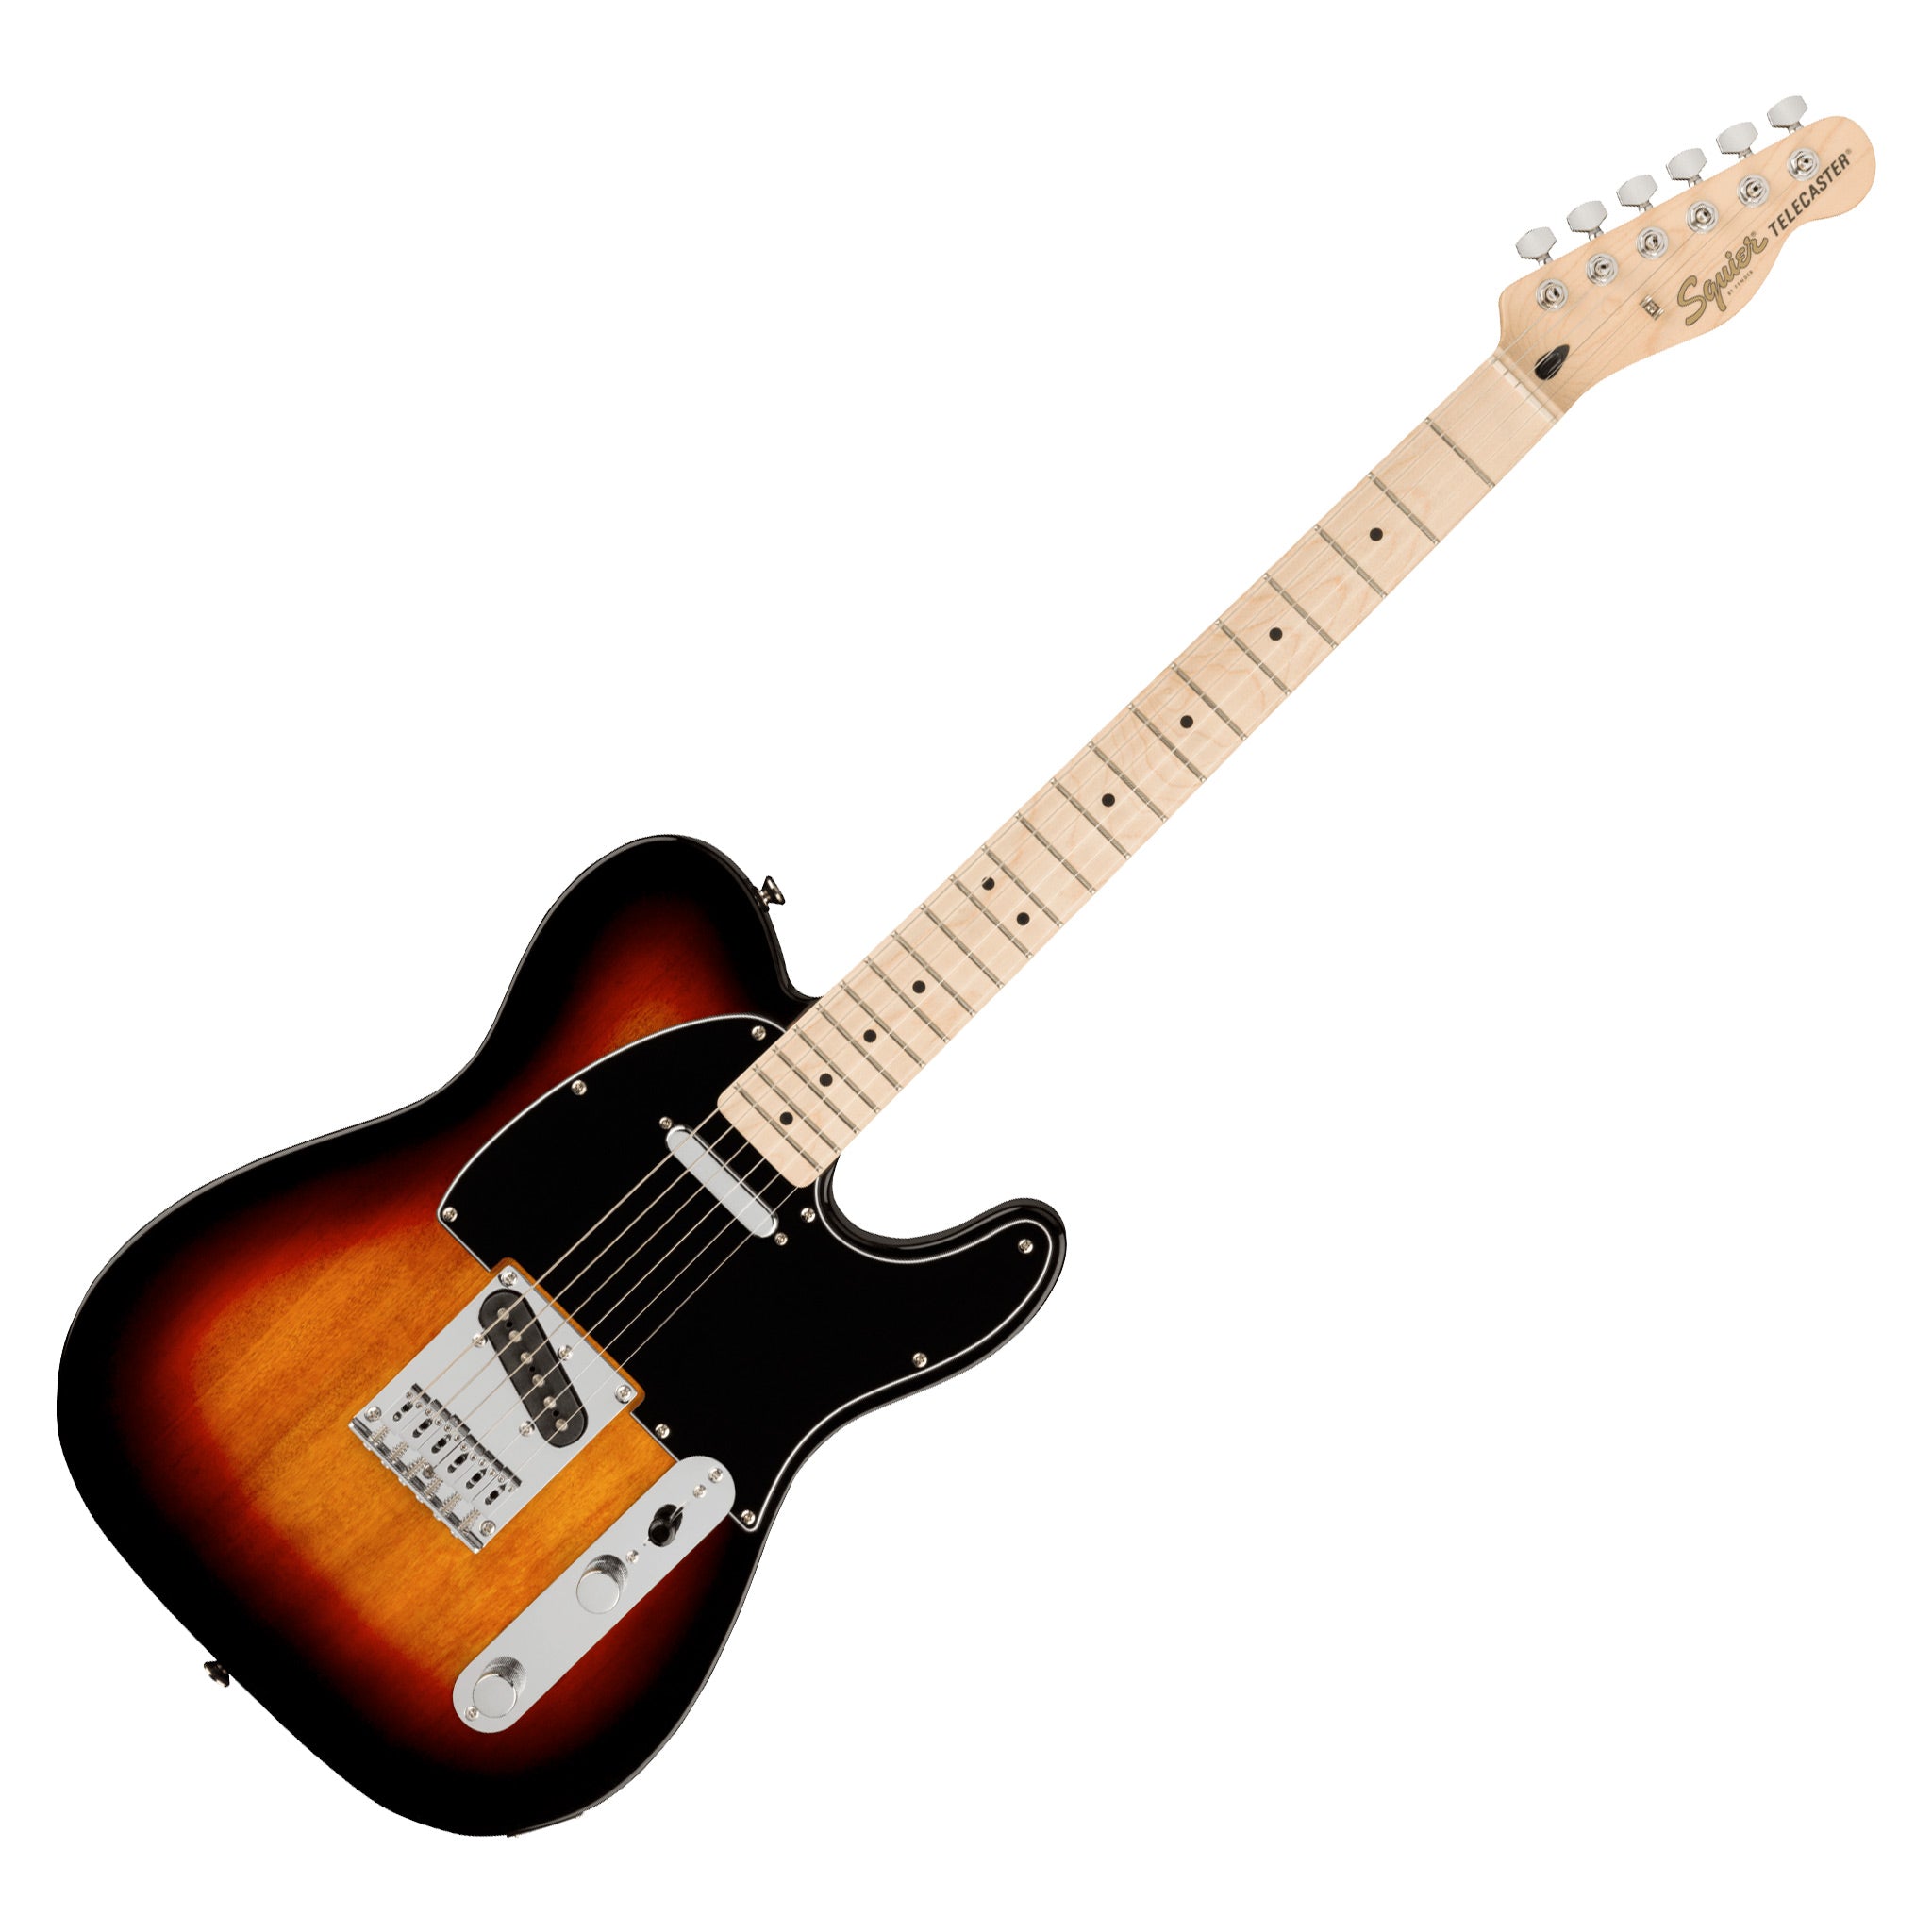 Fender Squier Affinity Series Telecaster electric guitar